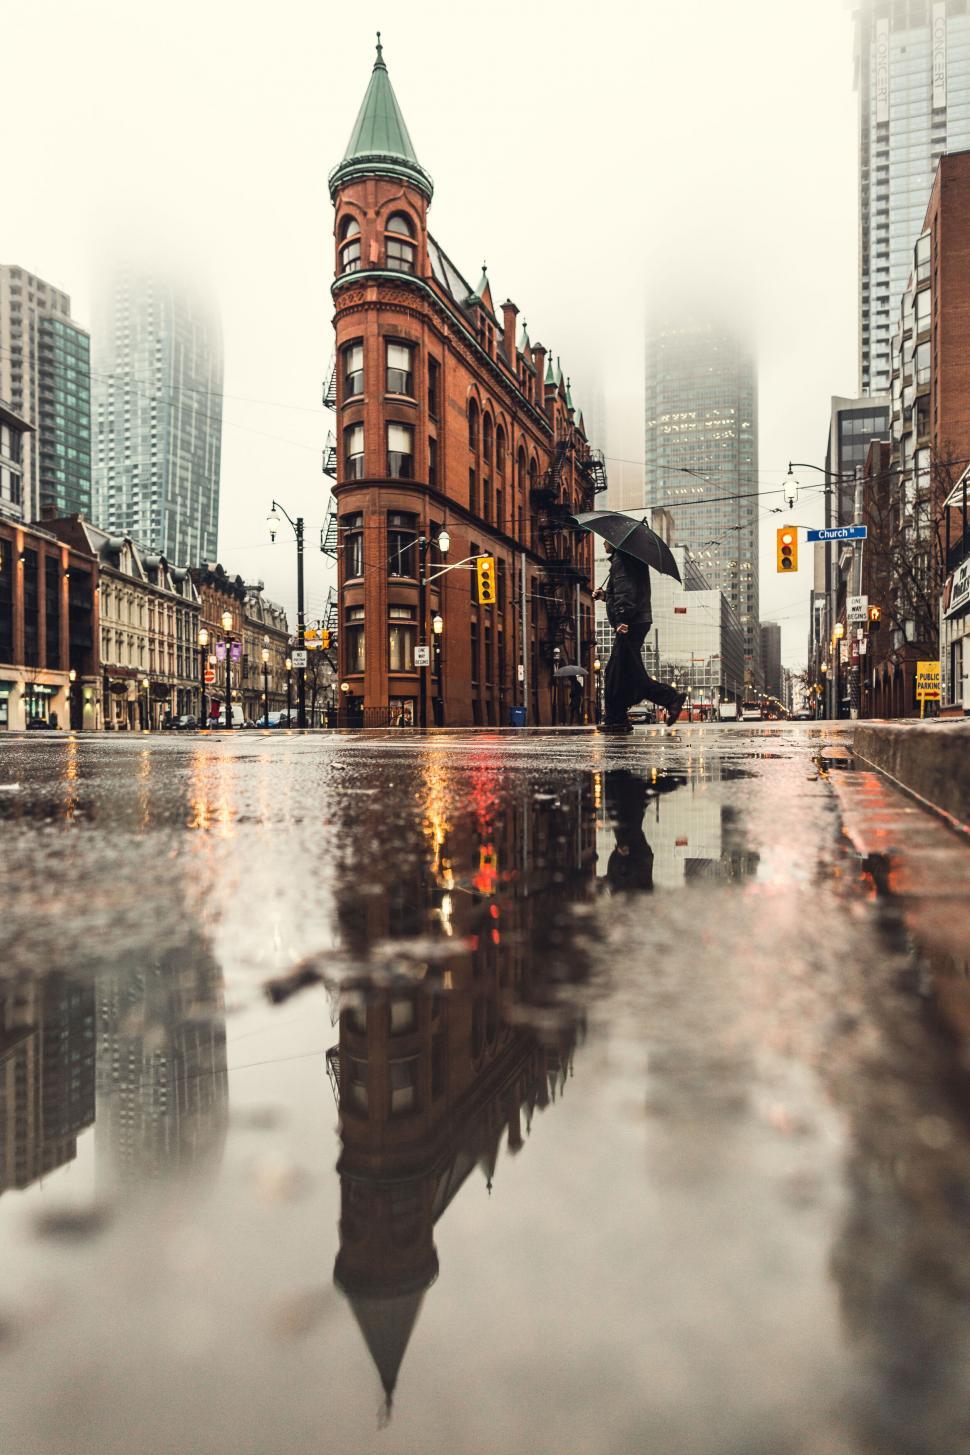 Free Image of Rainy city street with historic building 